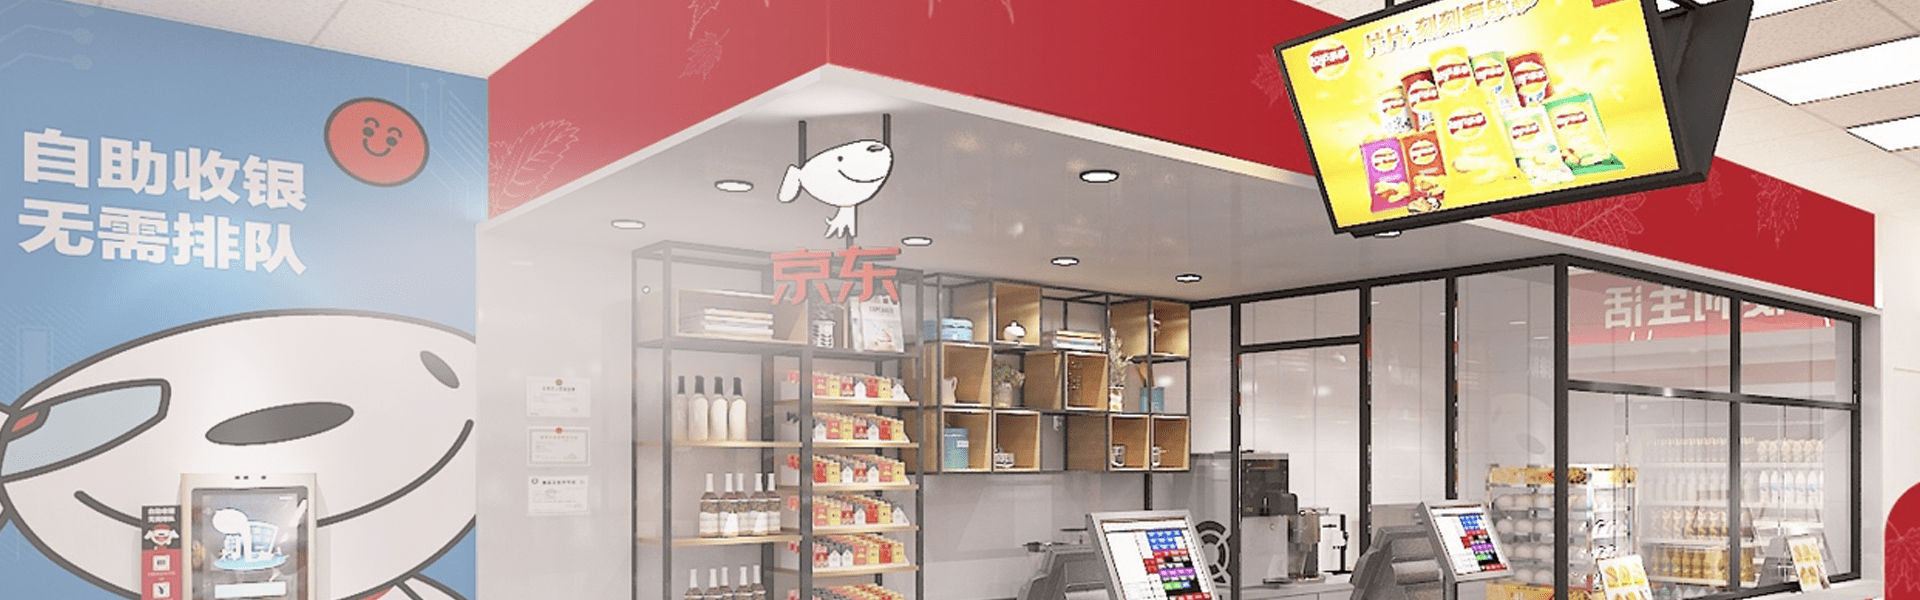 JD Convenience Store Now Opens Franchising Model in Four Cities in China